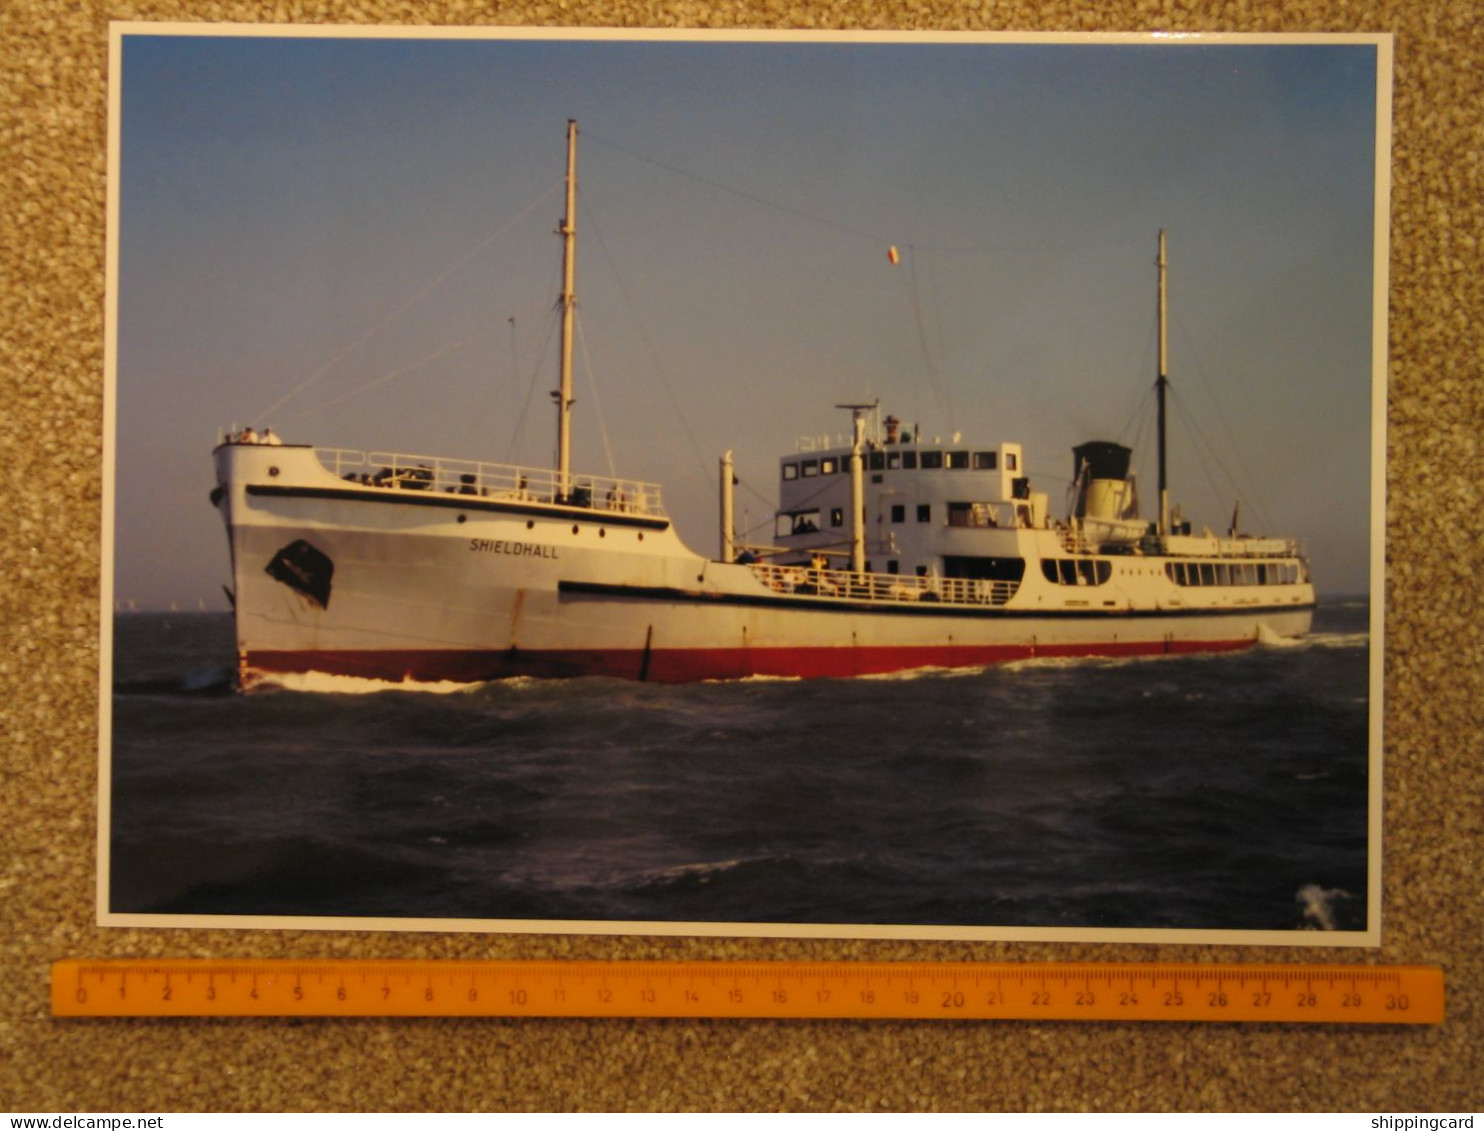 SHIELDHALL LARGE PHOTO - APPROX 200 X 300MM - Tankers